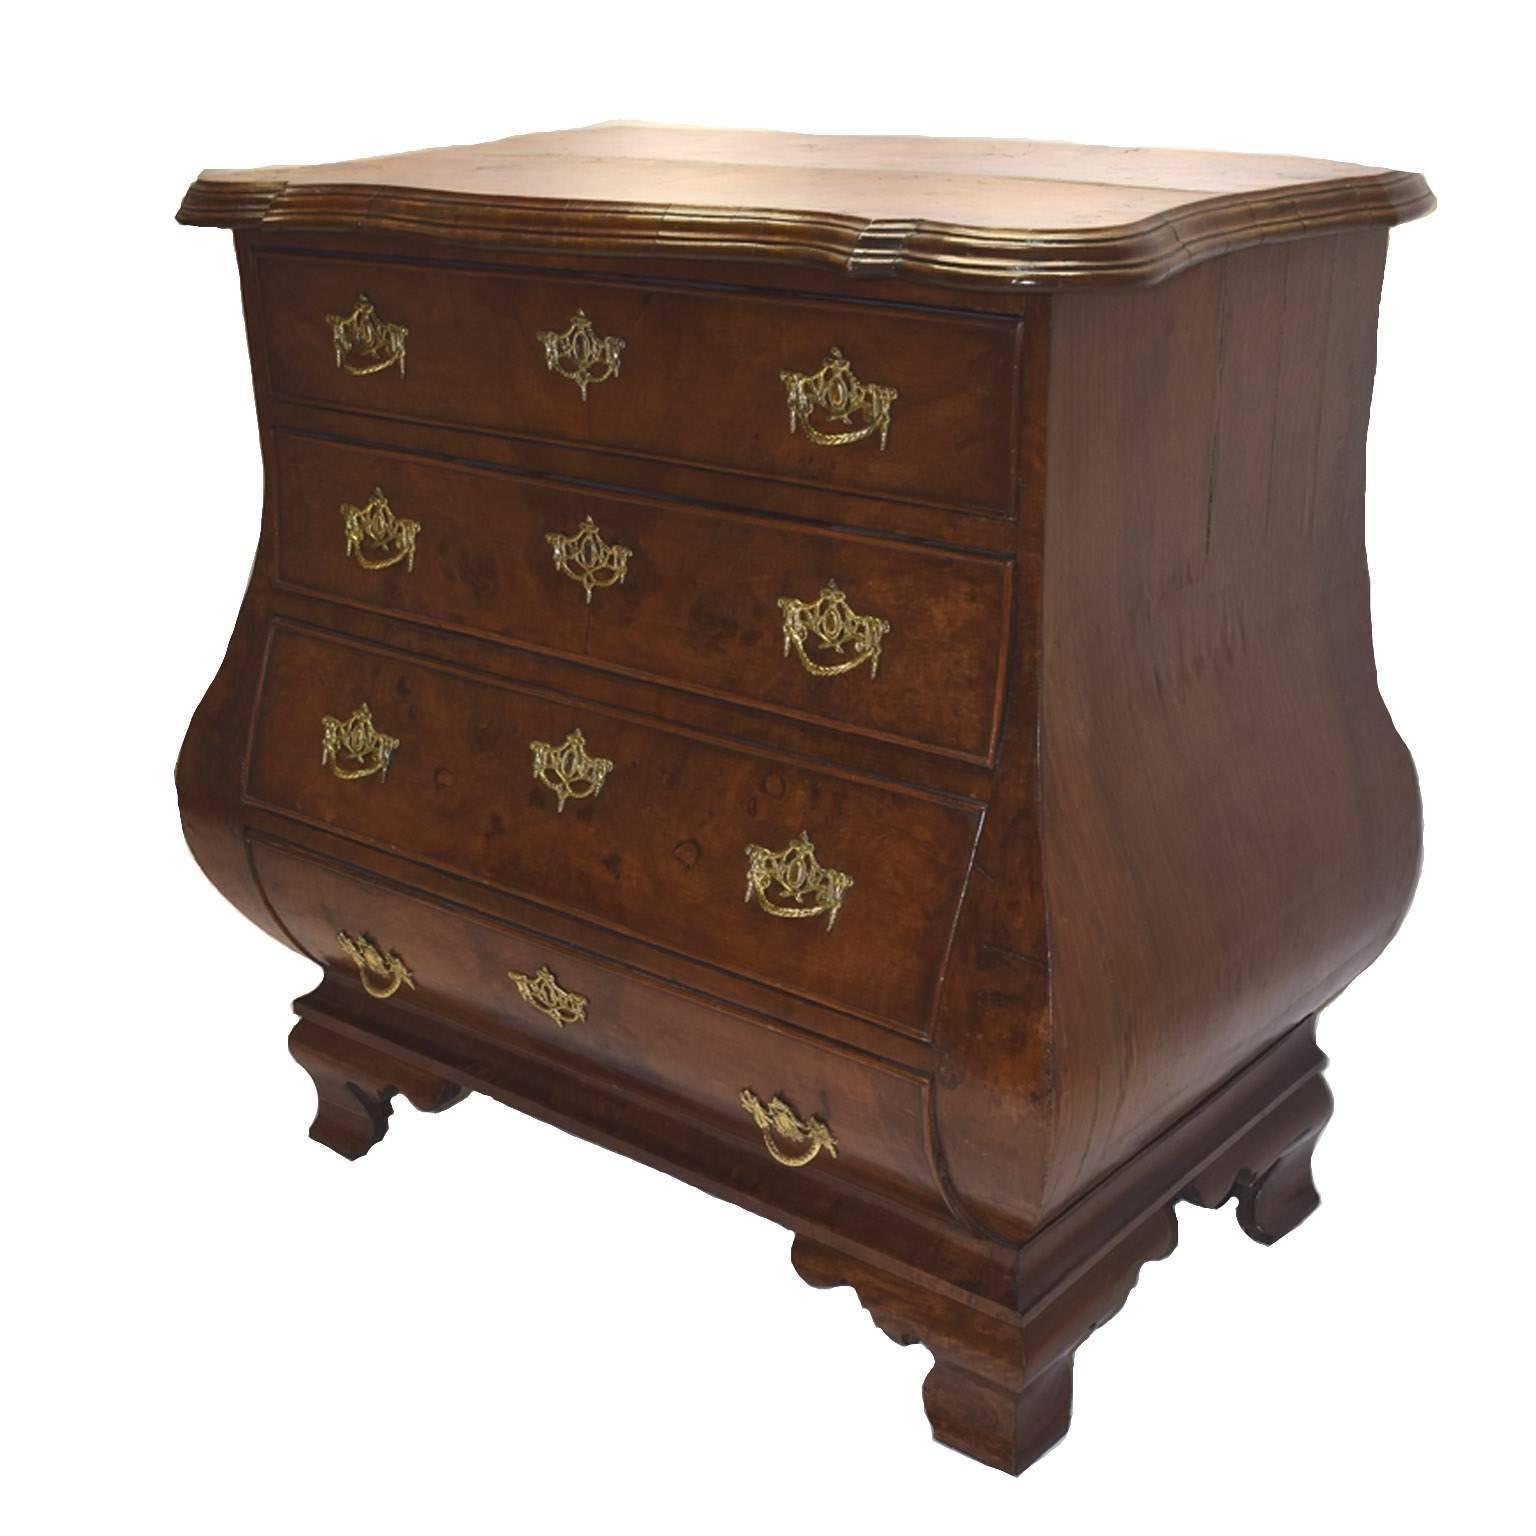 Antique Anglo/Dutch 18th century burl walnut diminutive bombe chest, with a rectangular top having a wave-carved edge, over four gradated drawers of bombe outline and fitted with original cast brasses sides also of bombe form and raised on shaped